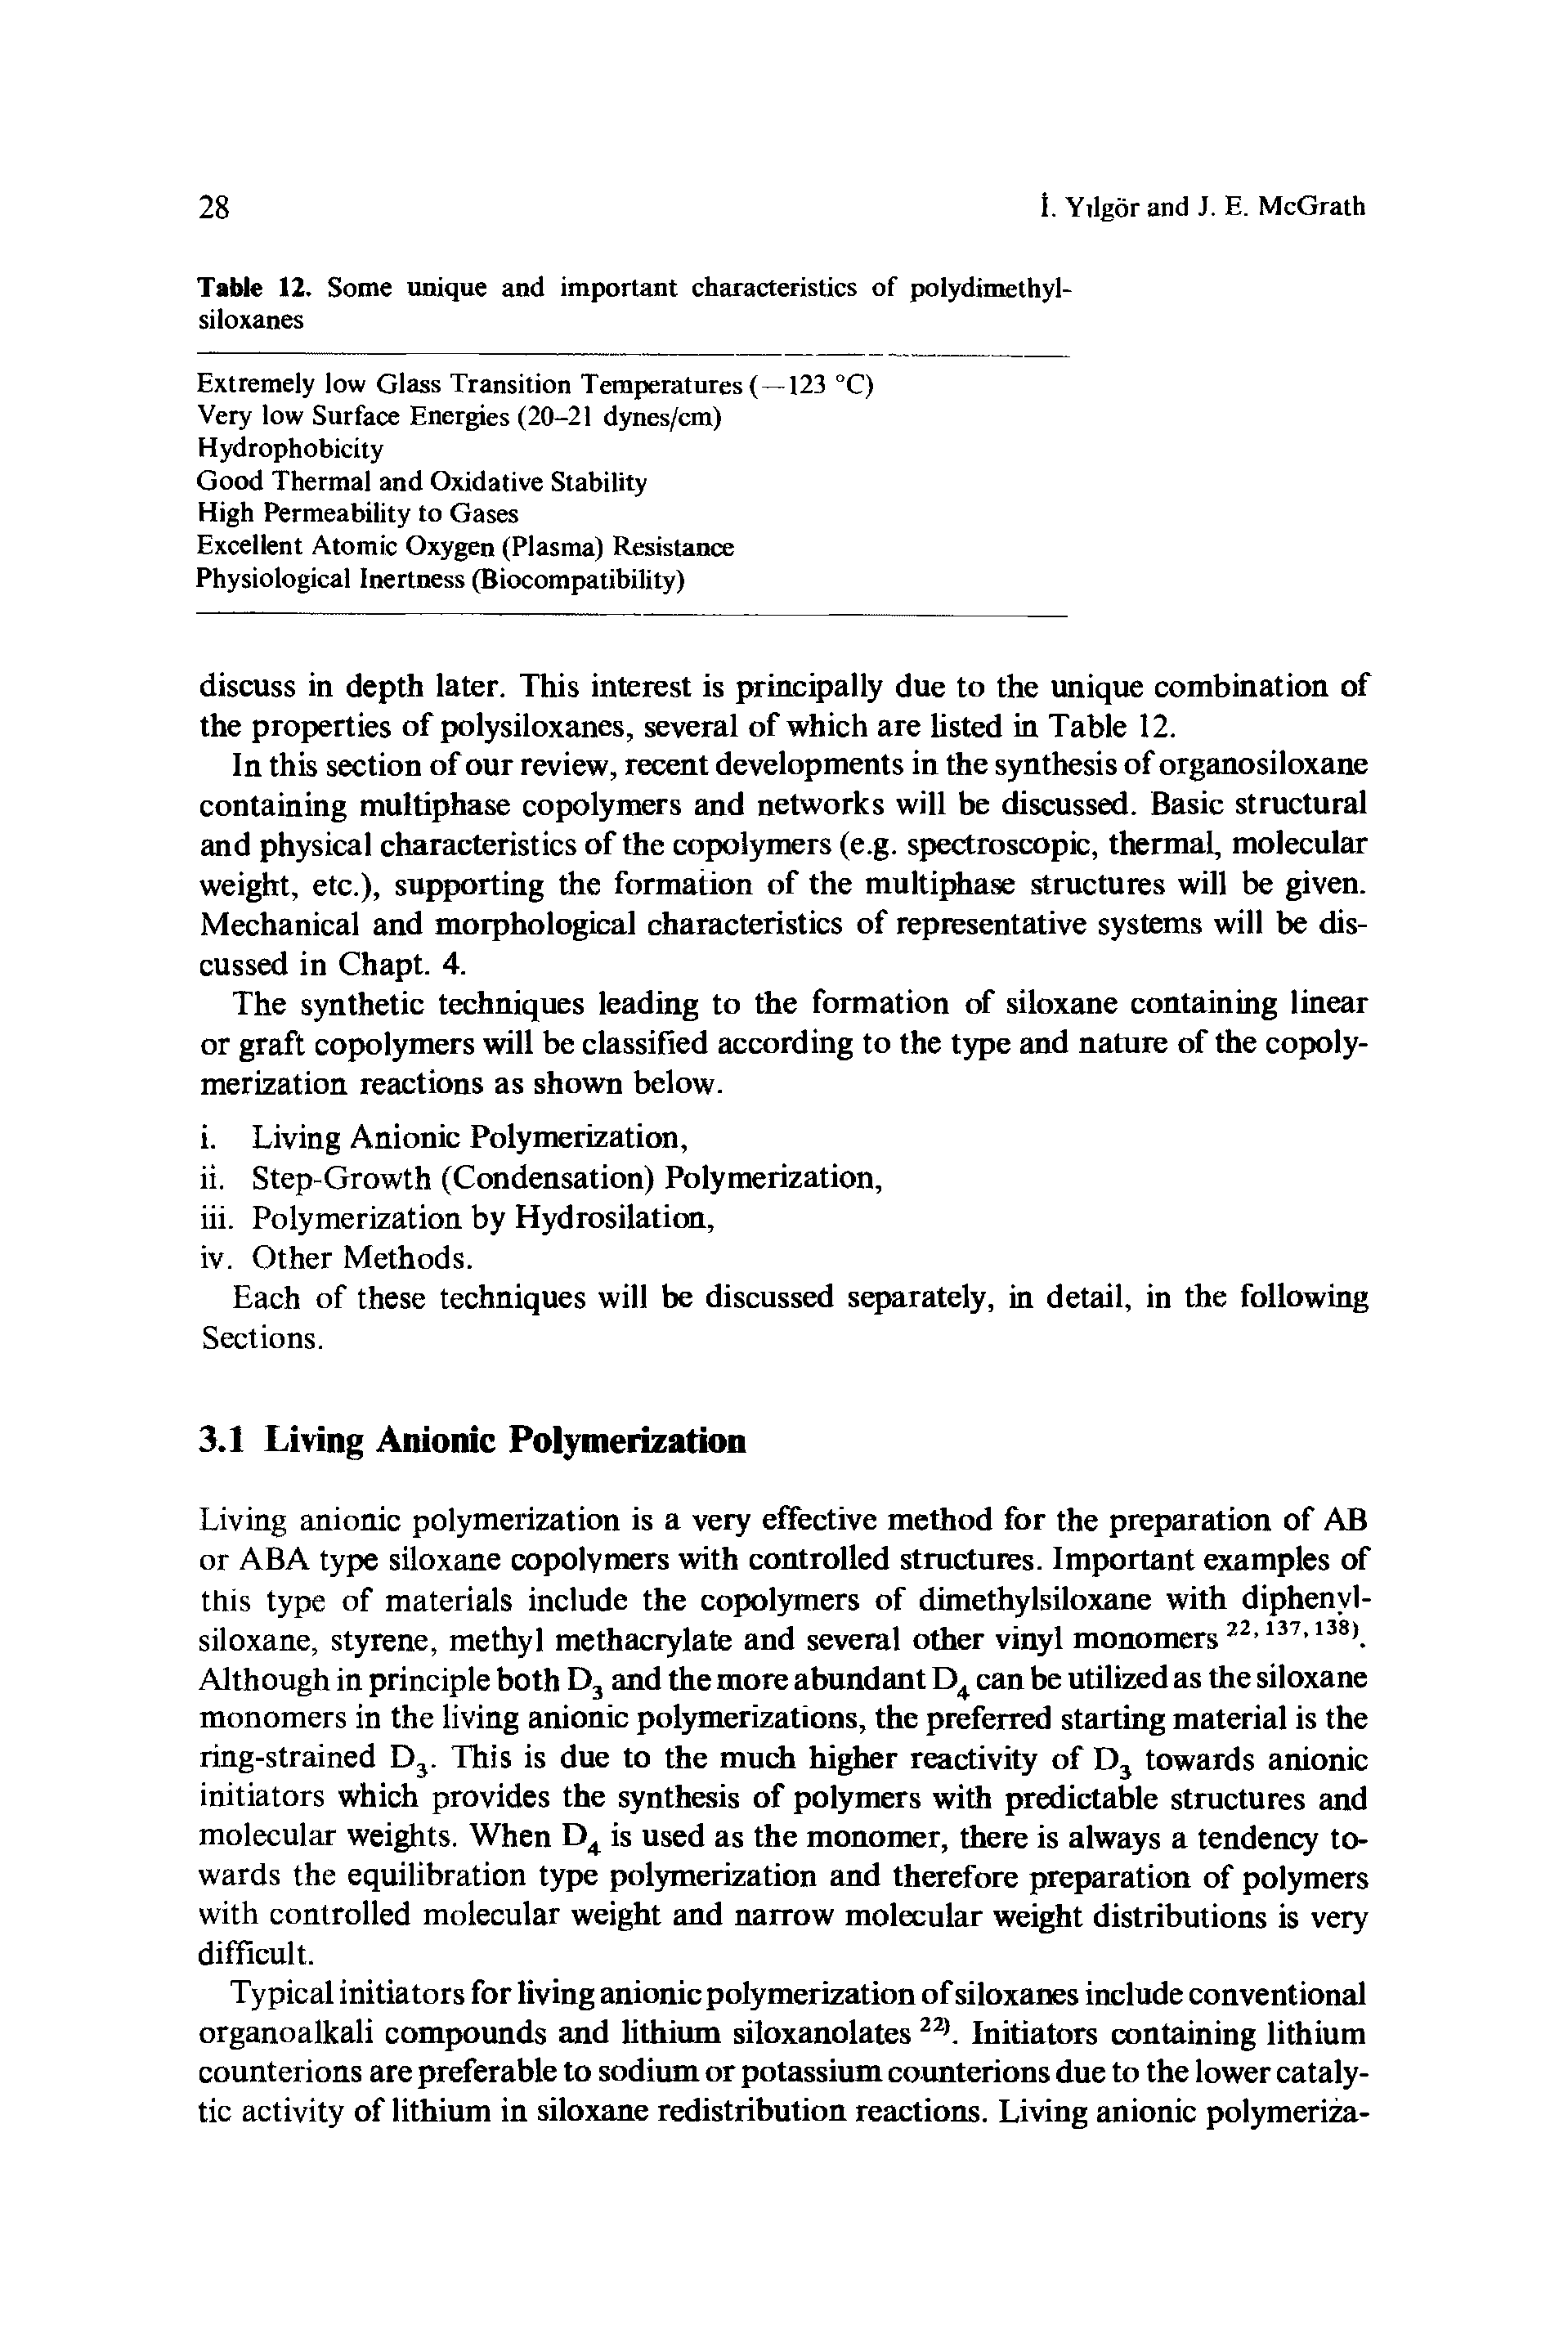 Table 12. Some unique and important characteristics of polydimethyl-siloxanes...